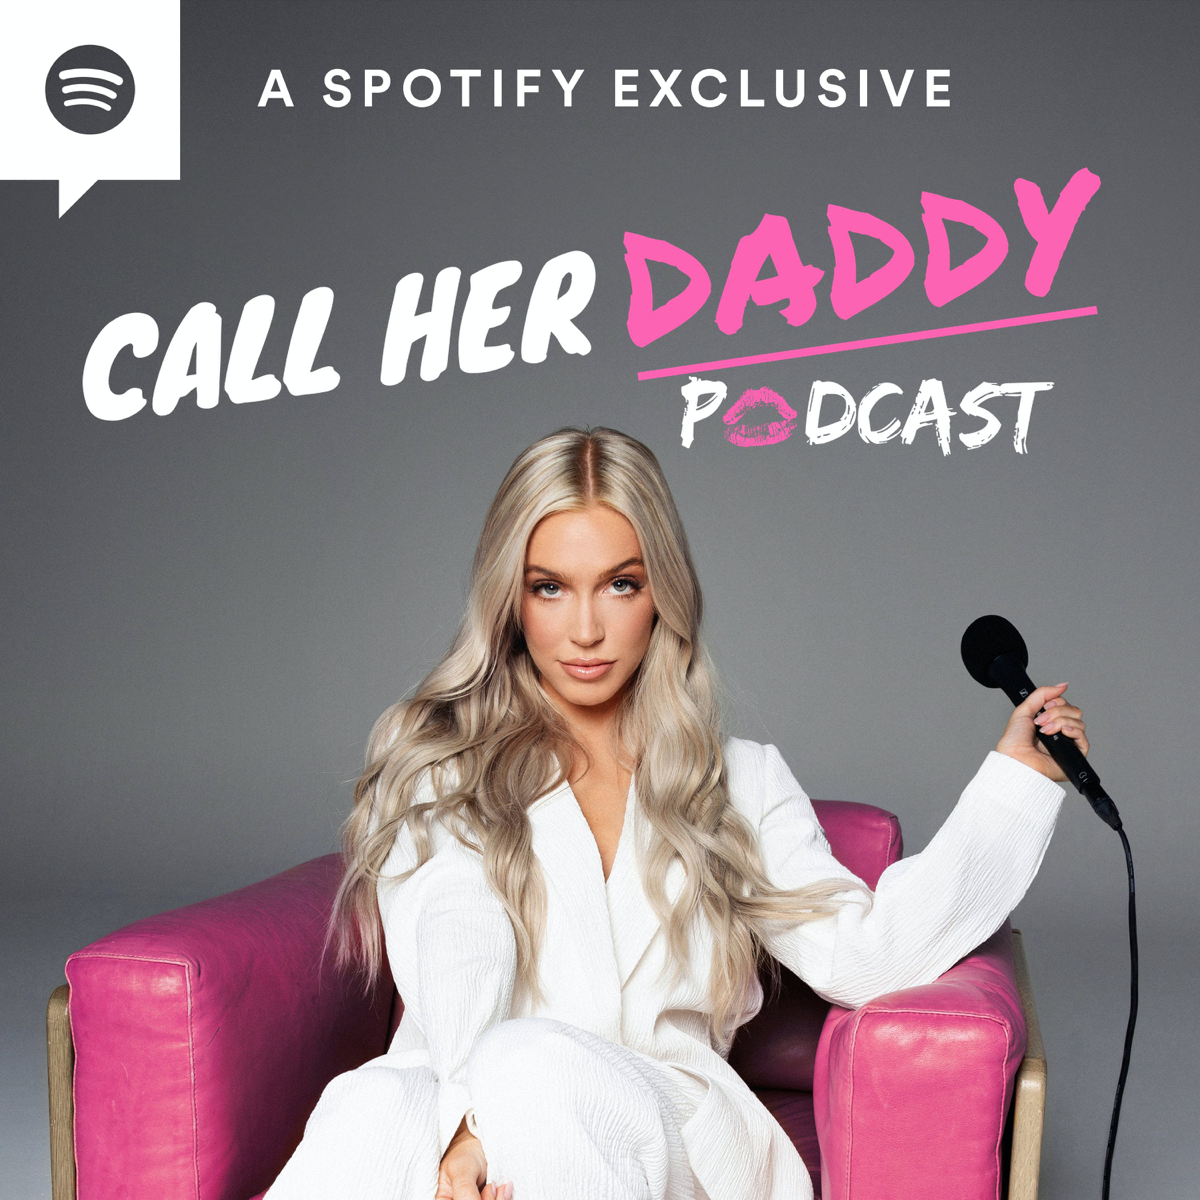 Miley Cyrus Pussy - The 10 Best Call Her Daddy Podcast Episodes | Podyssey